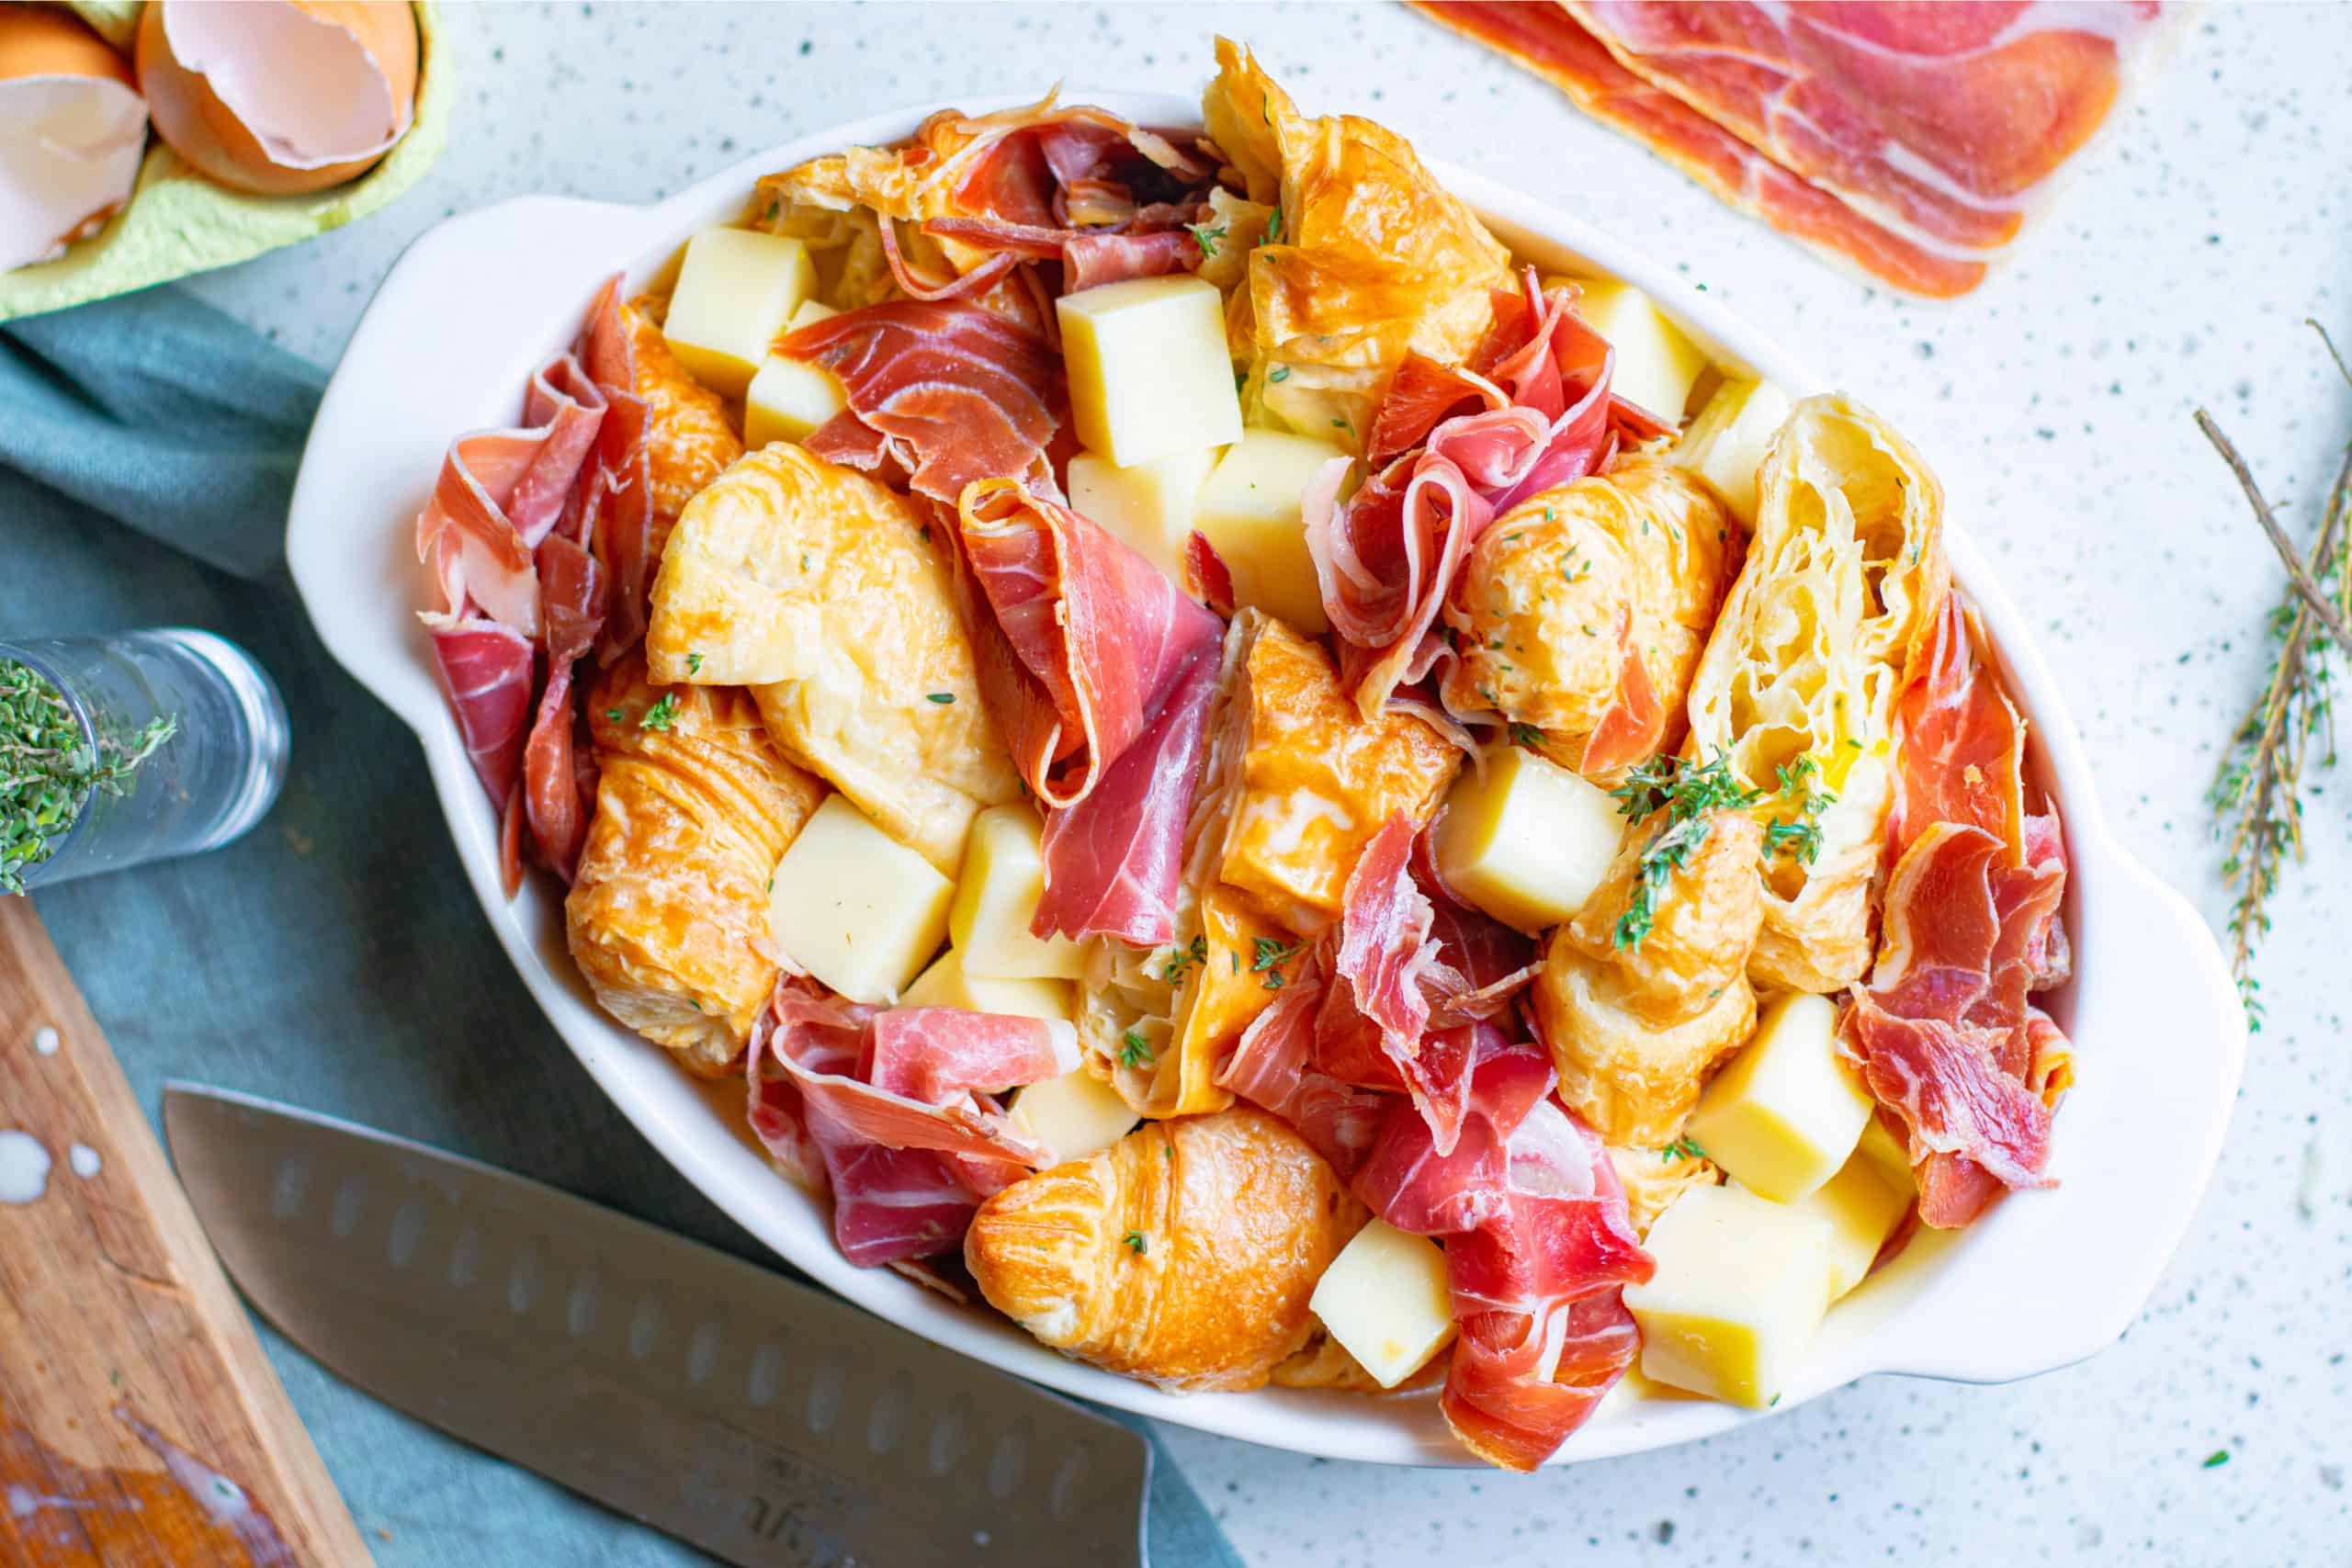 cubed mozzarella and thin slices of prosciutto packed in between croissant pieces.